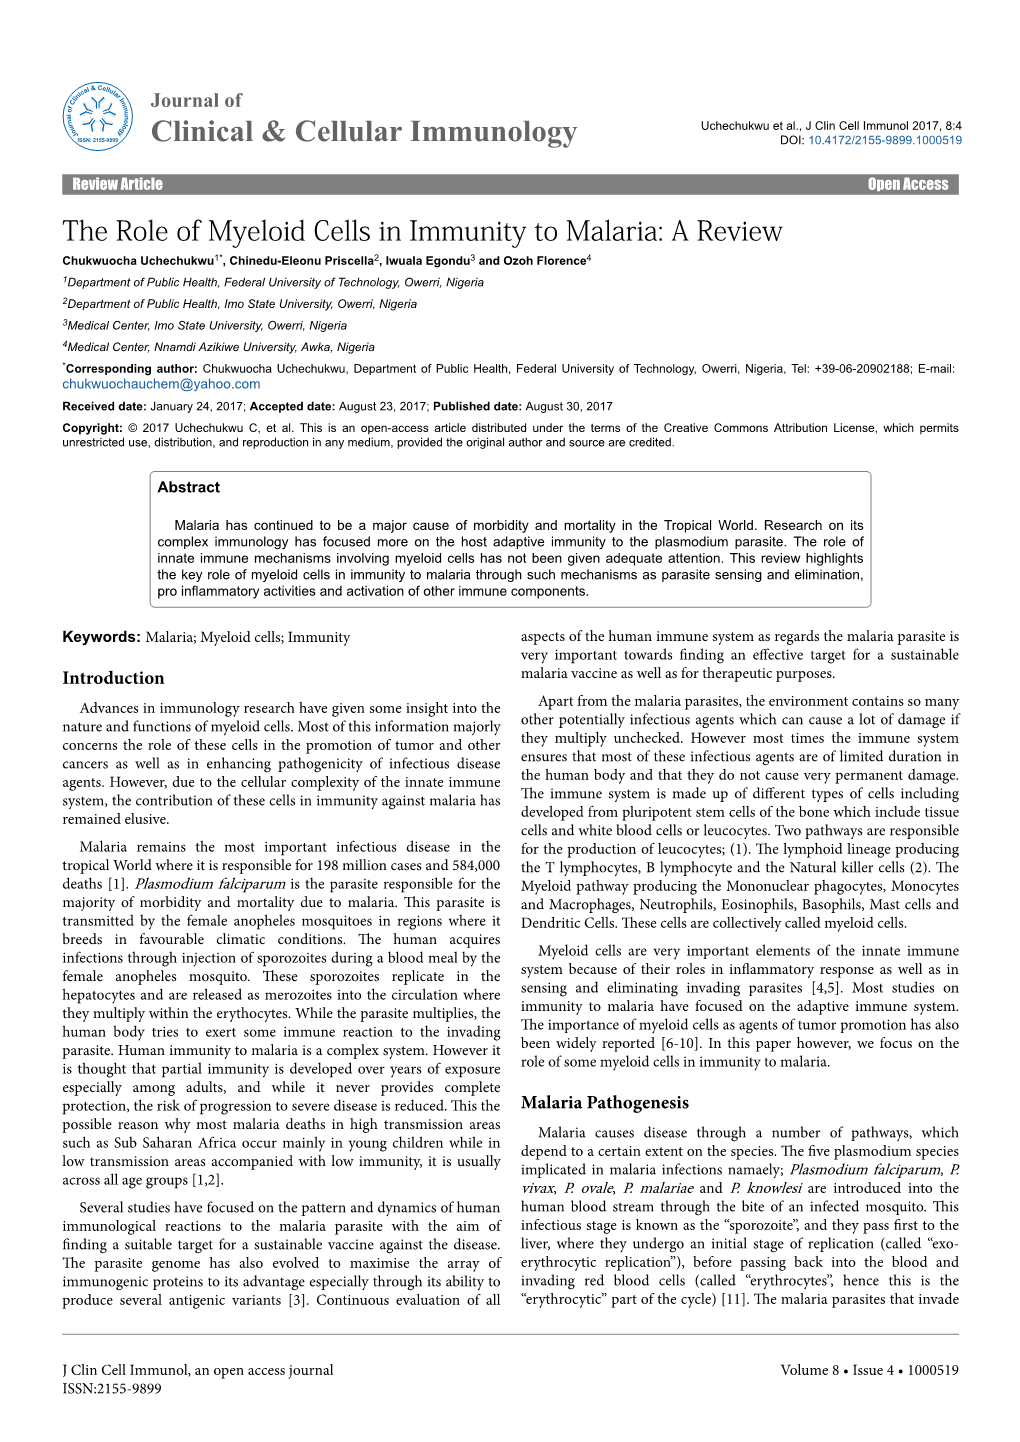 The Role of Myeloid Cells in Immunity to Malaria